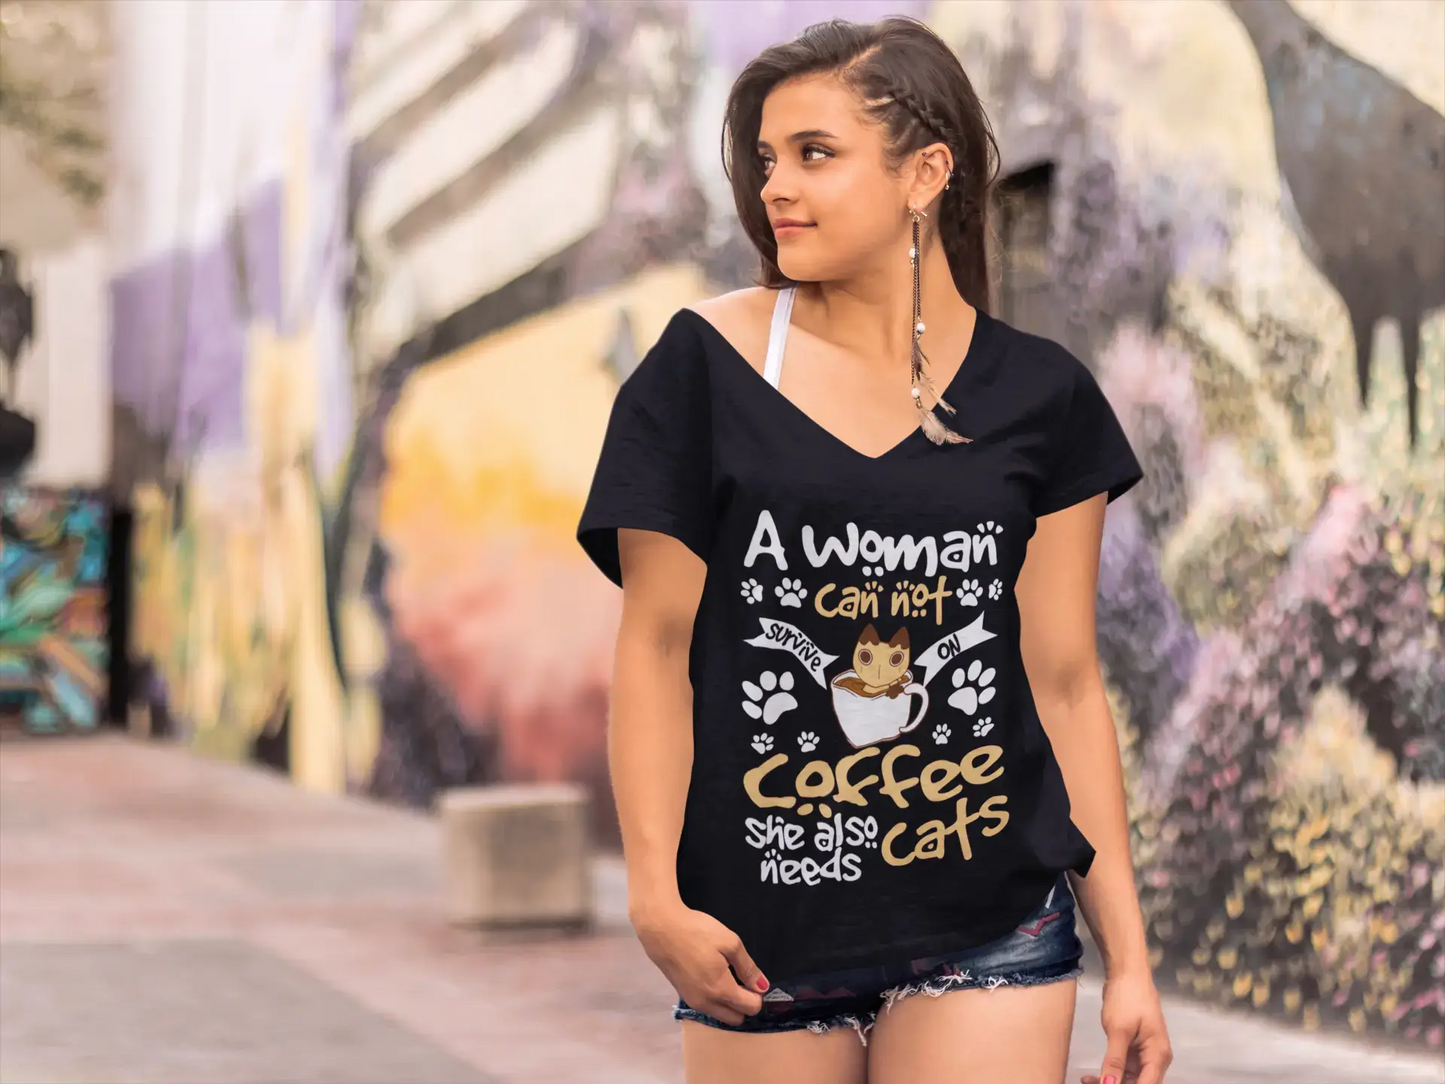 ULTRABASIC Women's T-Shirt A Woman Can Not Survive on Coffee Alone She Needs Cats - Funny Kitten Shirt for Cat Lovers